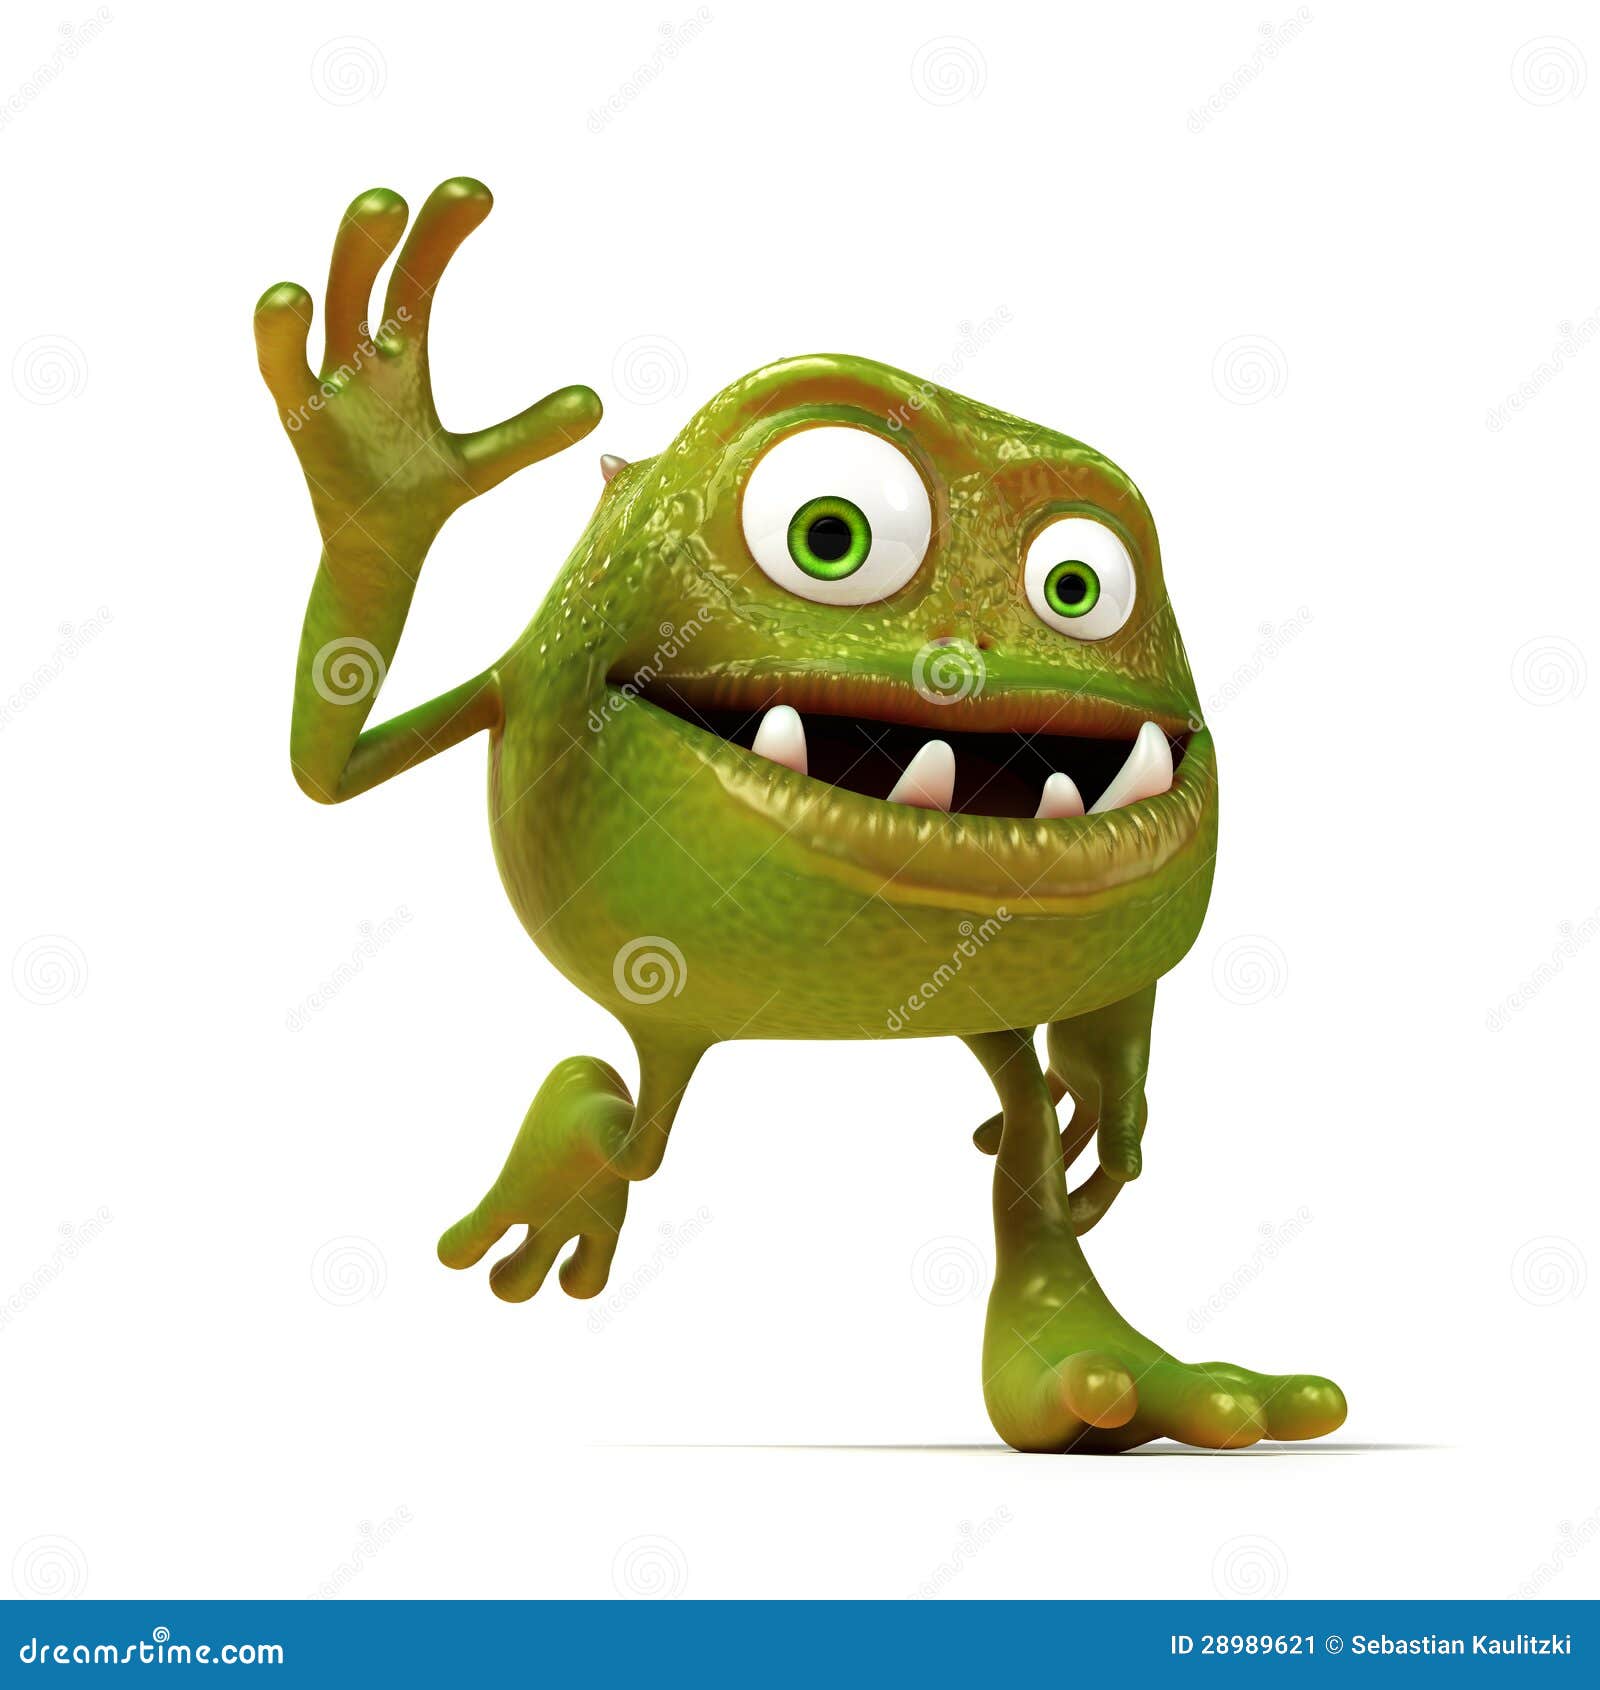 funny bacteria toon character